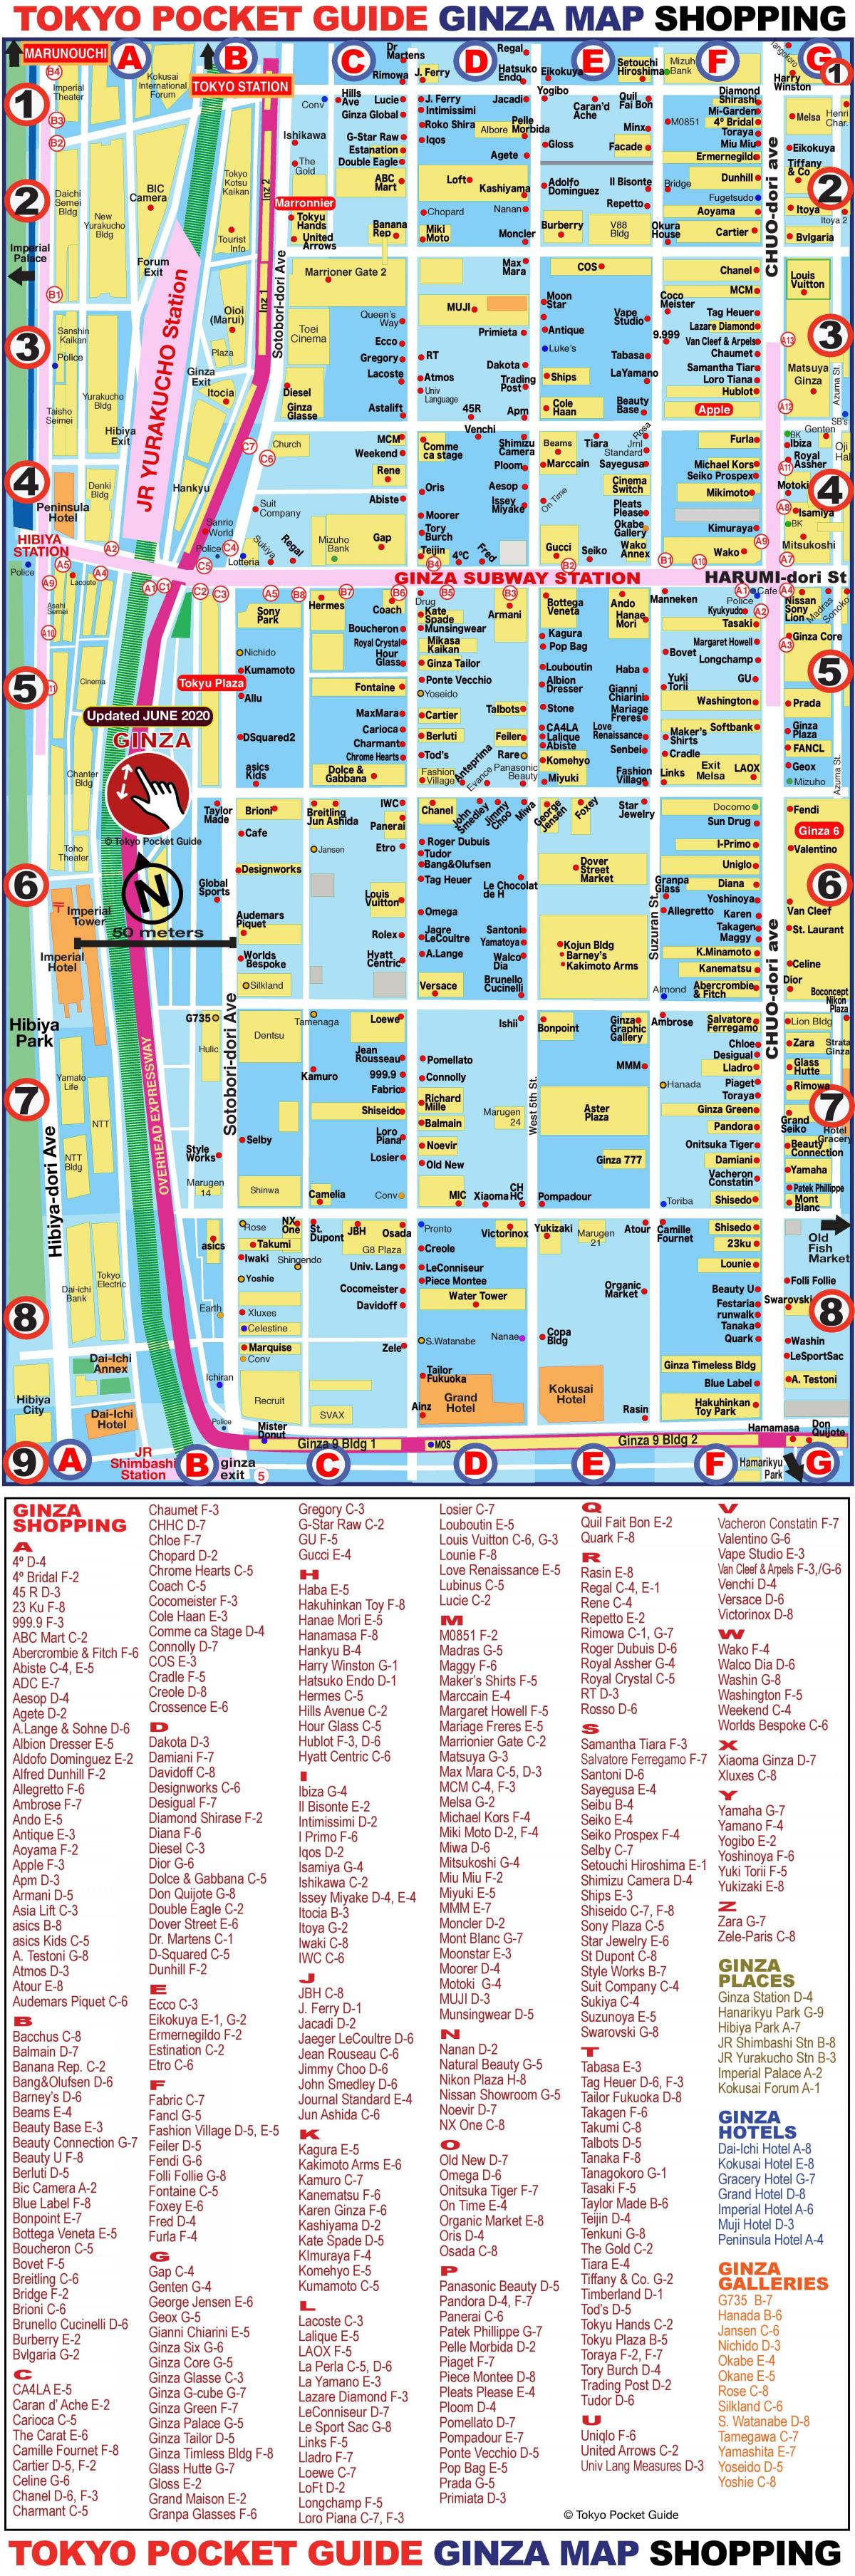 Ginza shopping district map